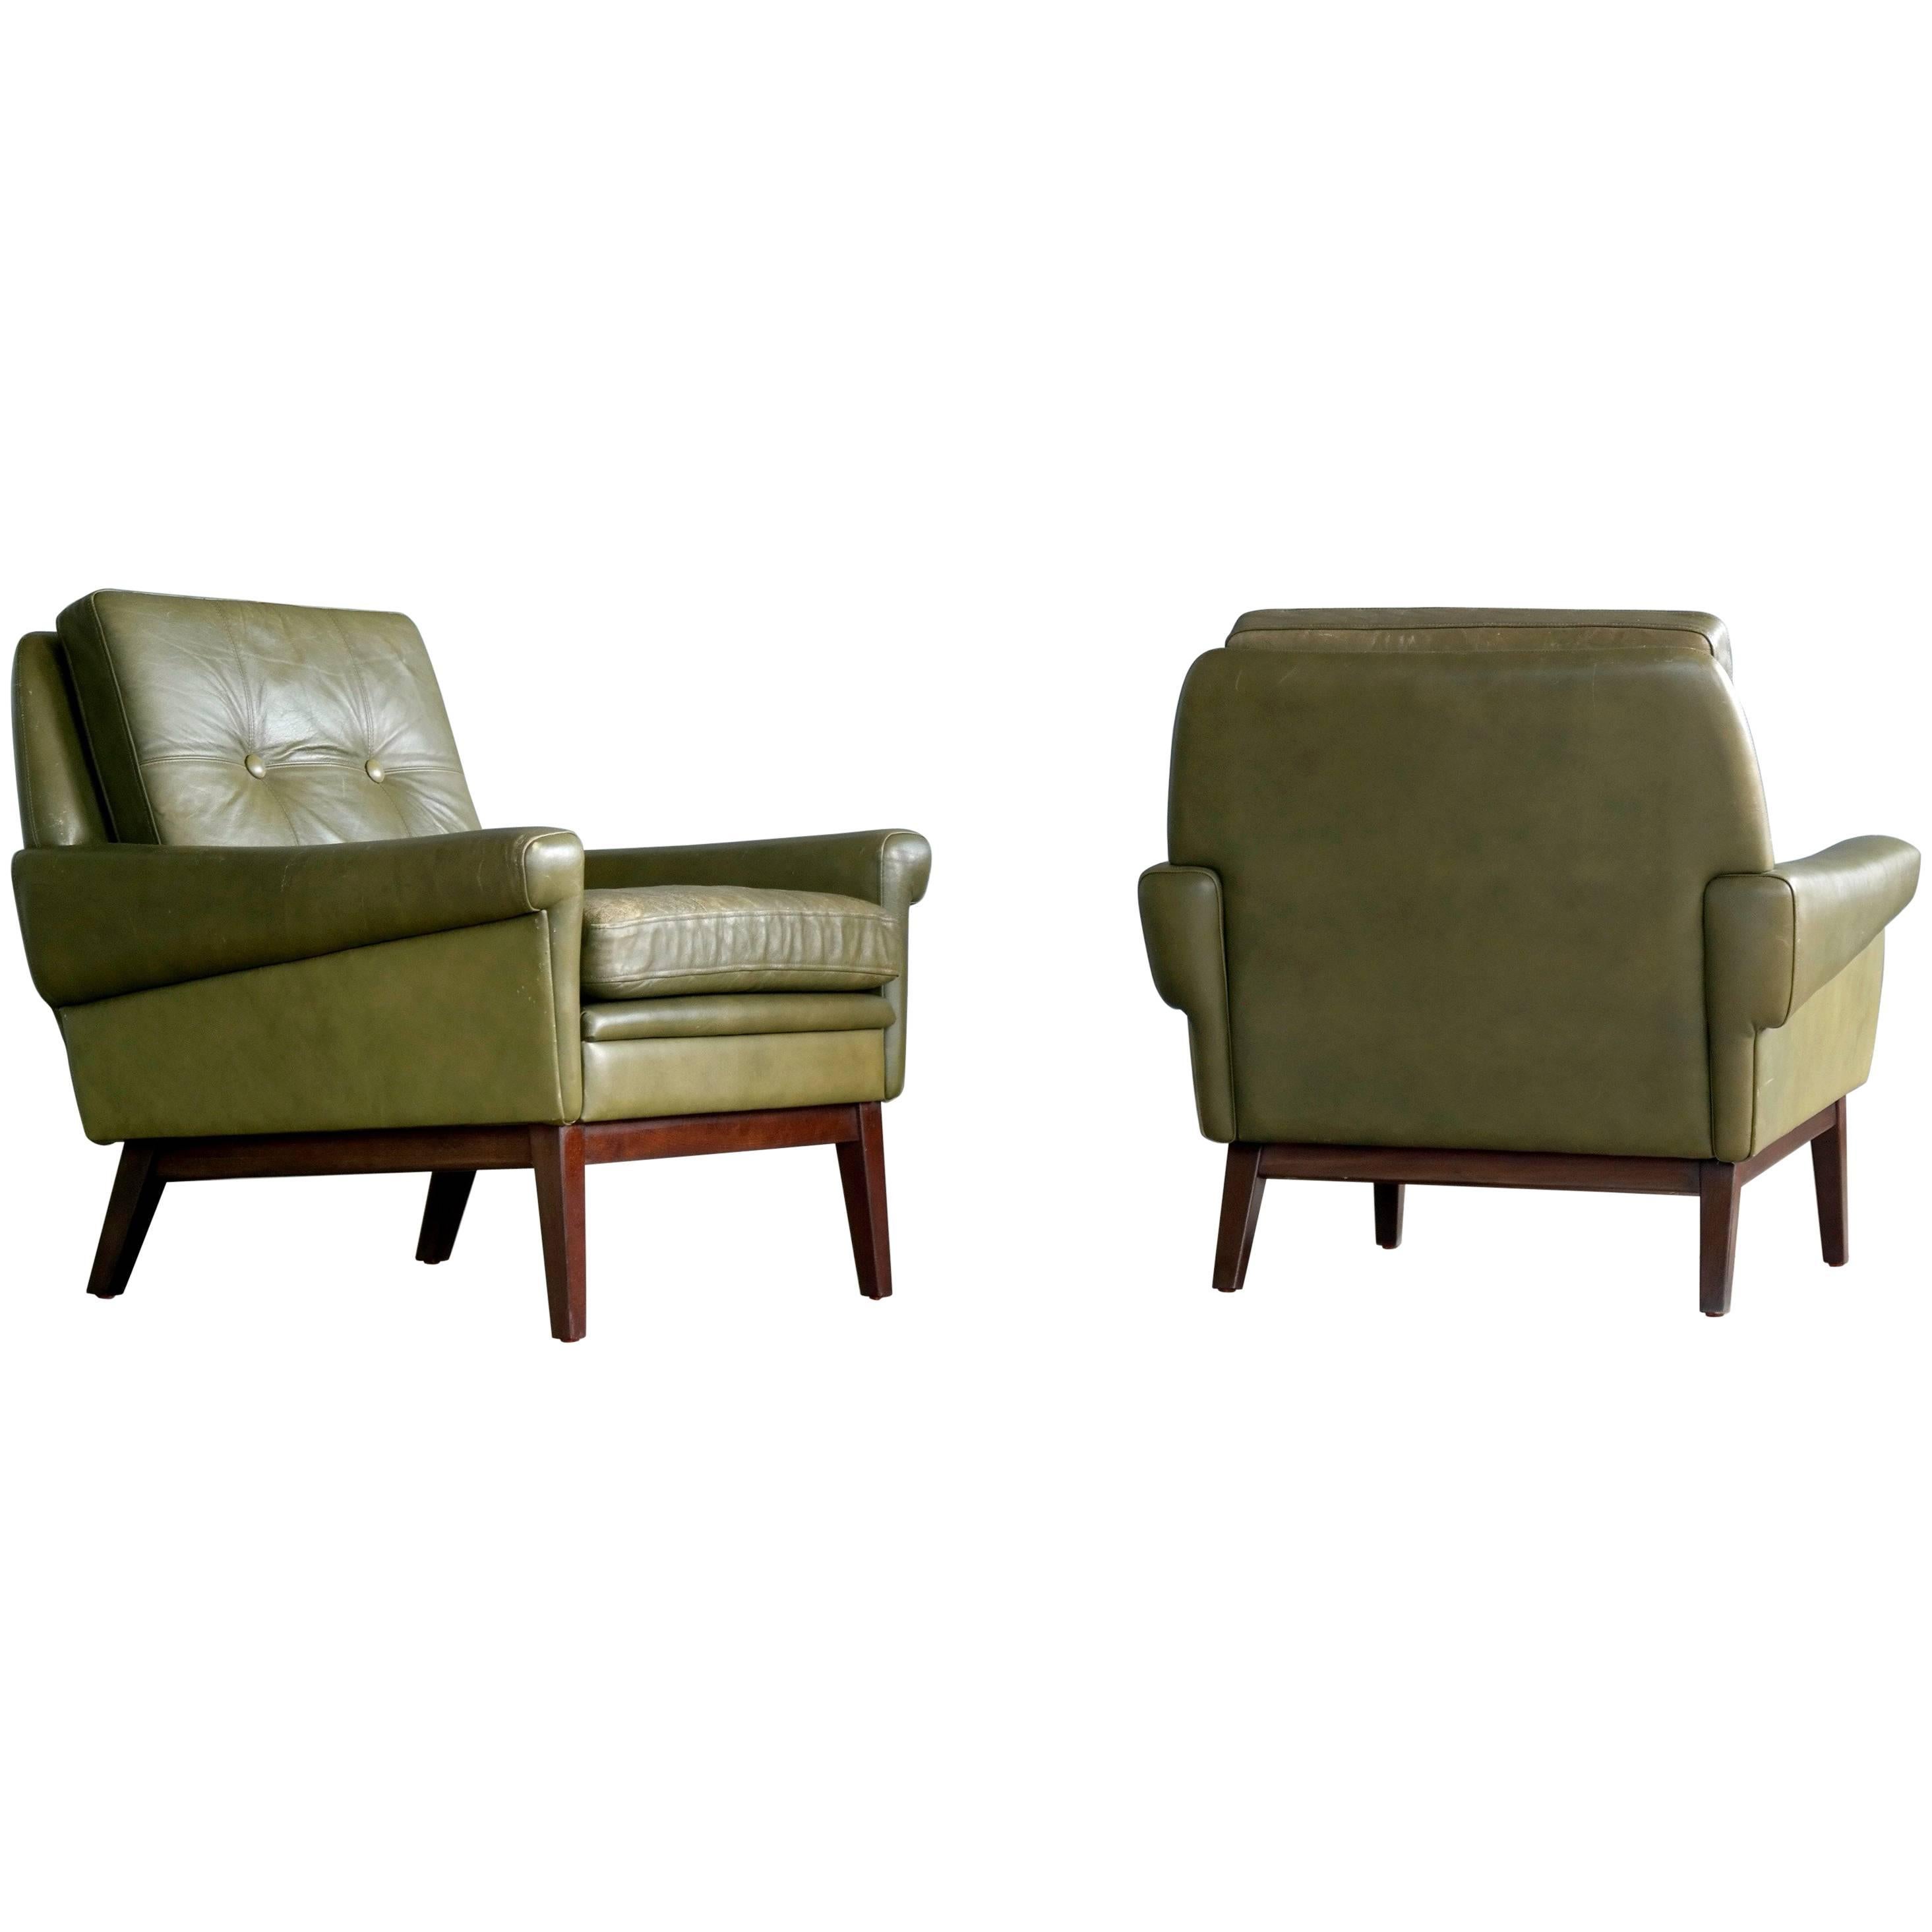 Svend Skipper Pair of Lounge Chairs in Green Leather